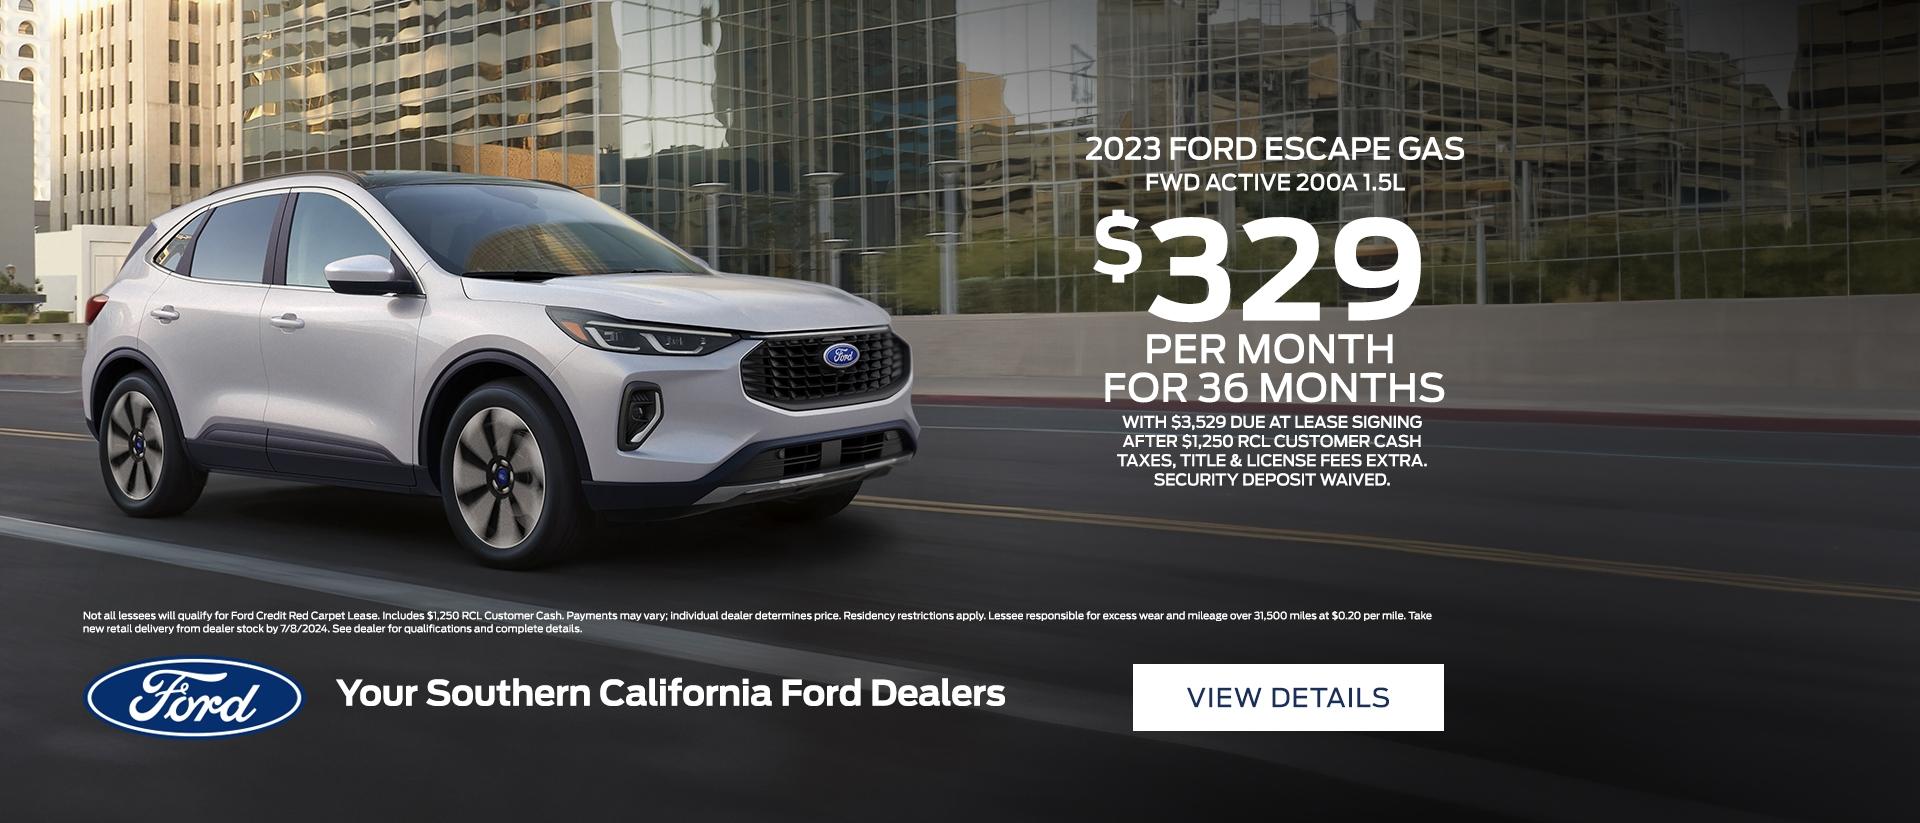 2023 Ford Escape Gas Lease Offer | Southern California Ford Dealers